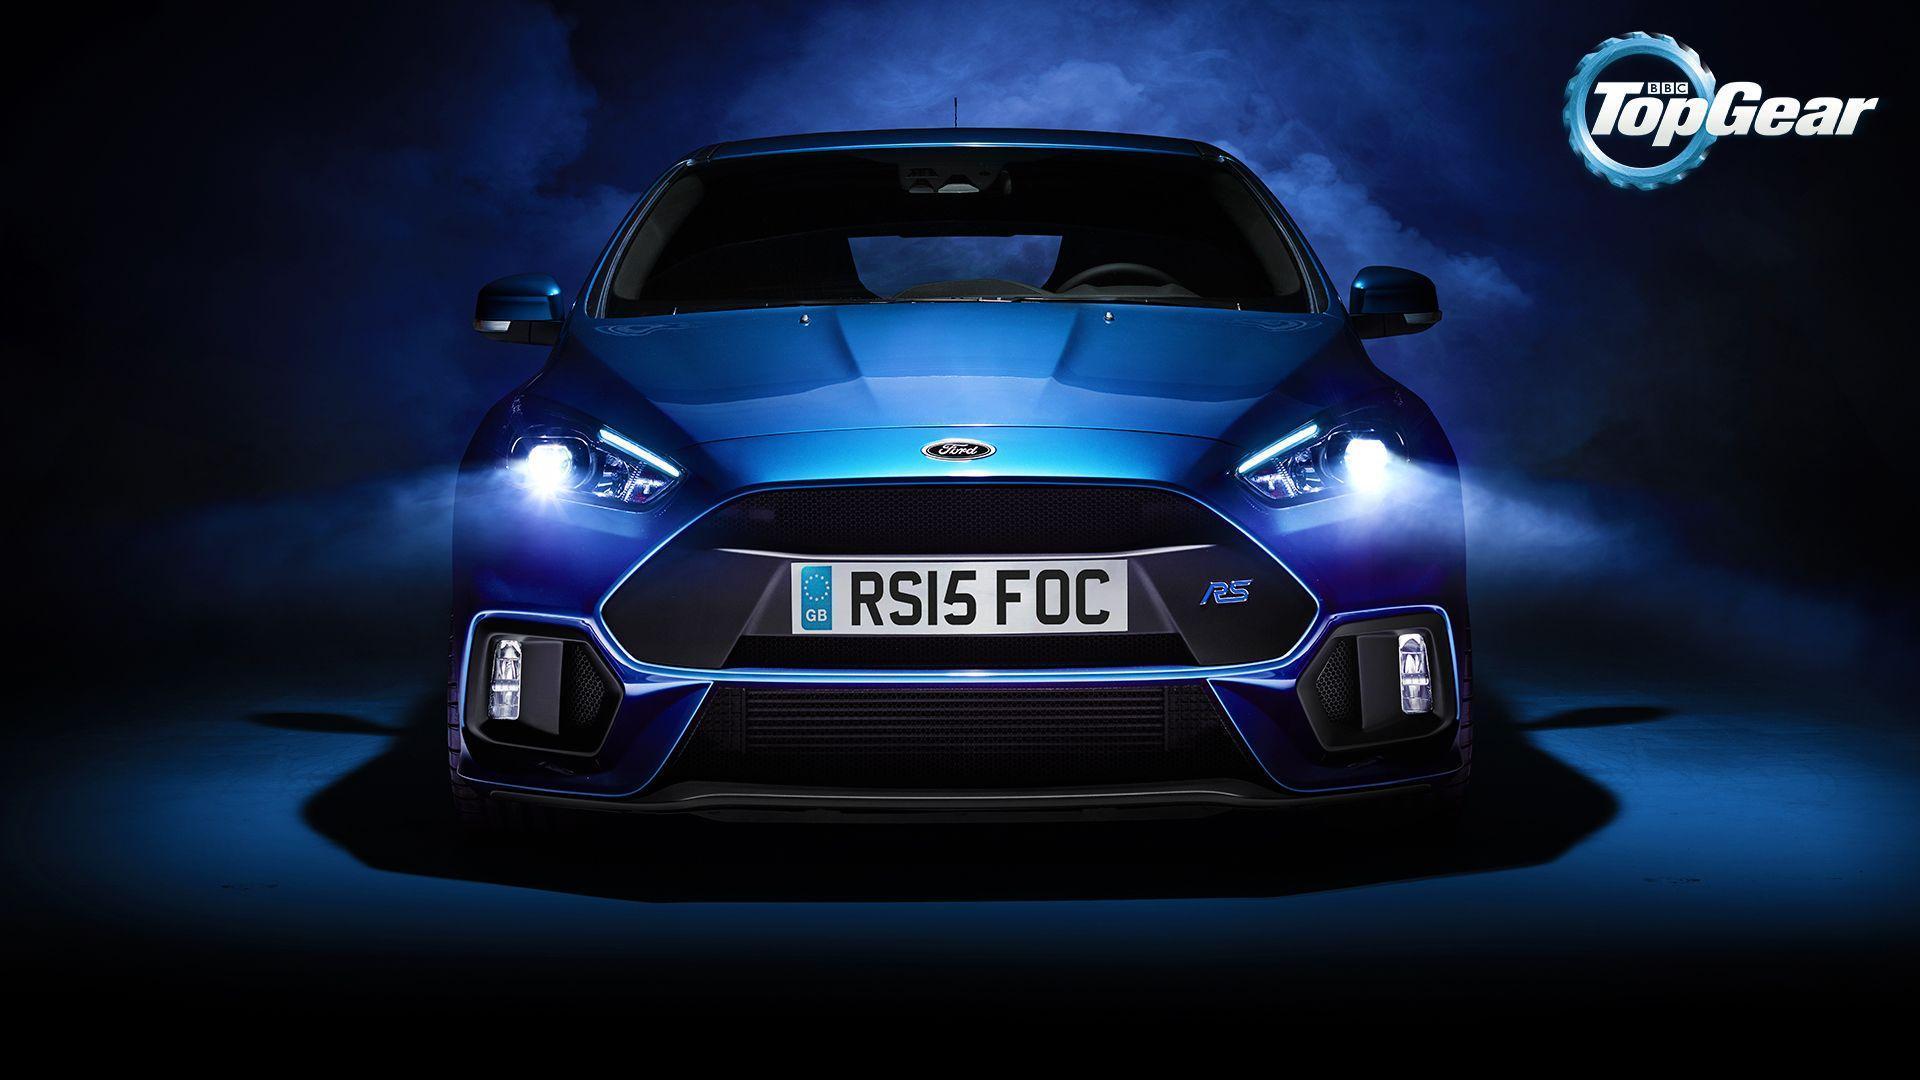 Ford Focus Wallpapers Wallpaper Cave